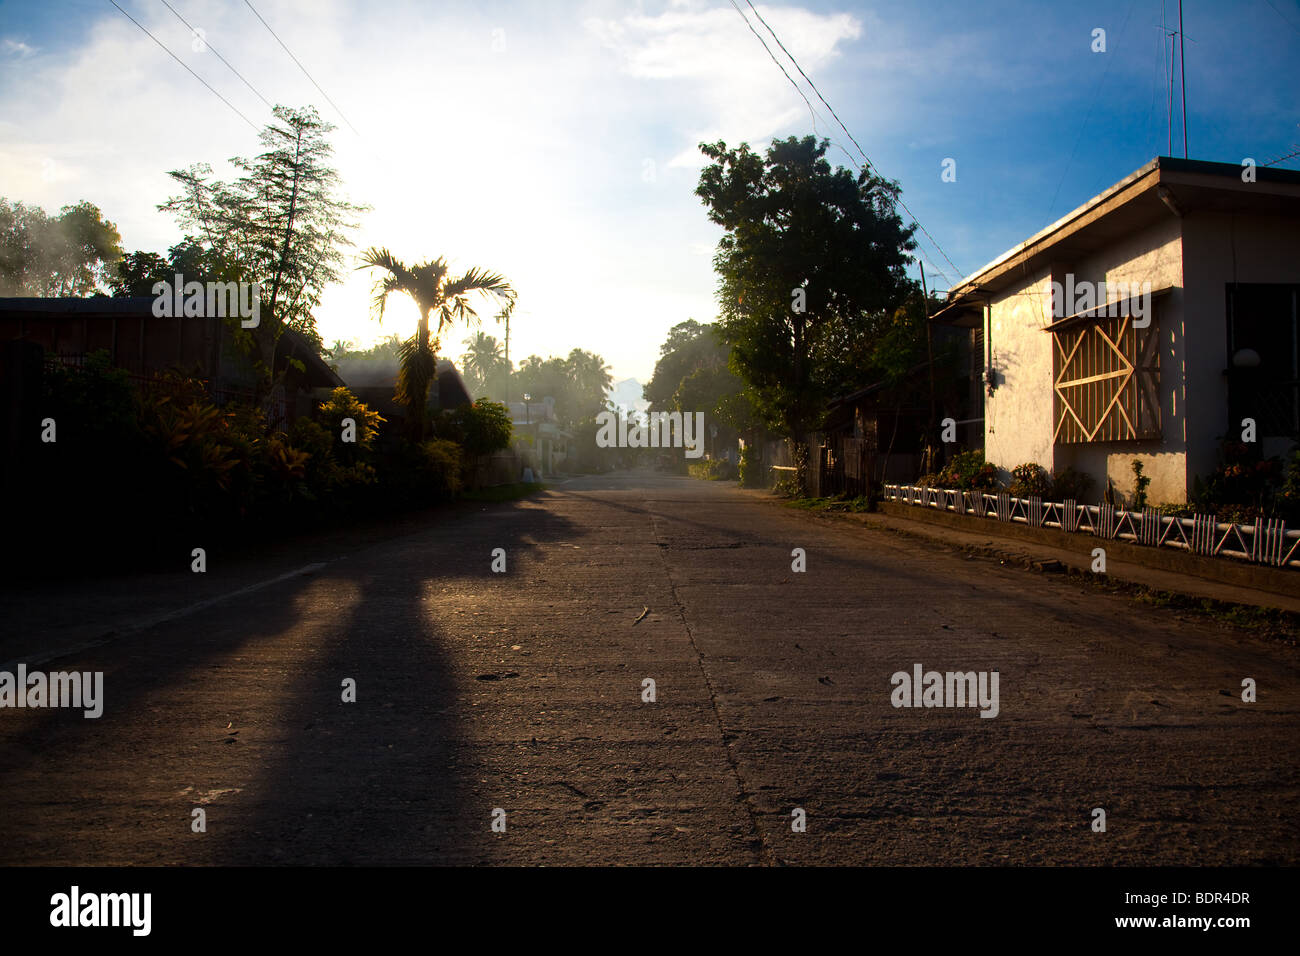 An empty street scene at dusk, remote San Francisco in the Philippines Stock Photo